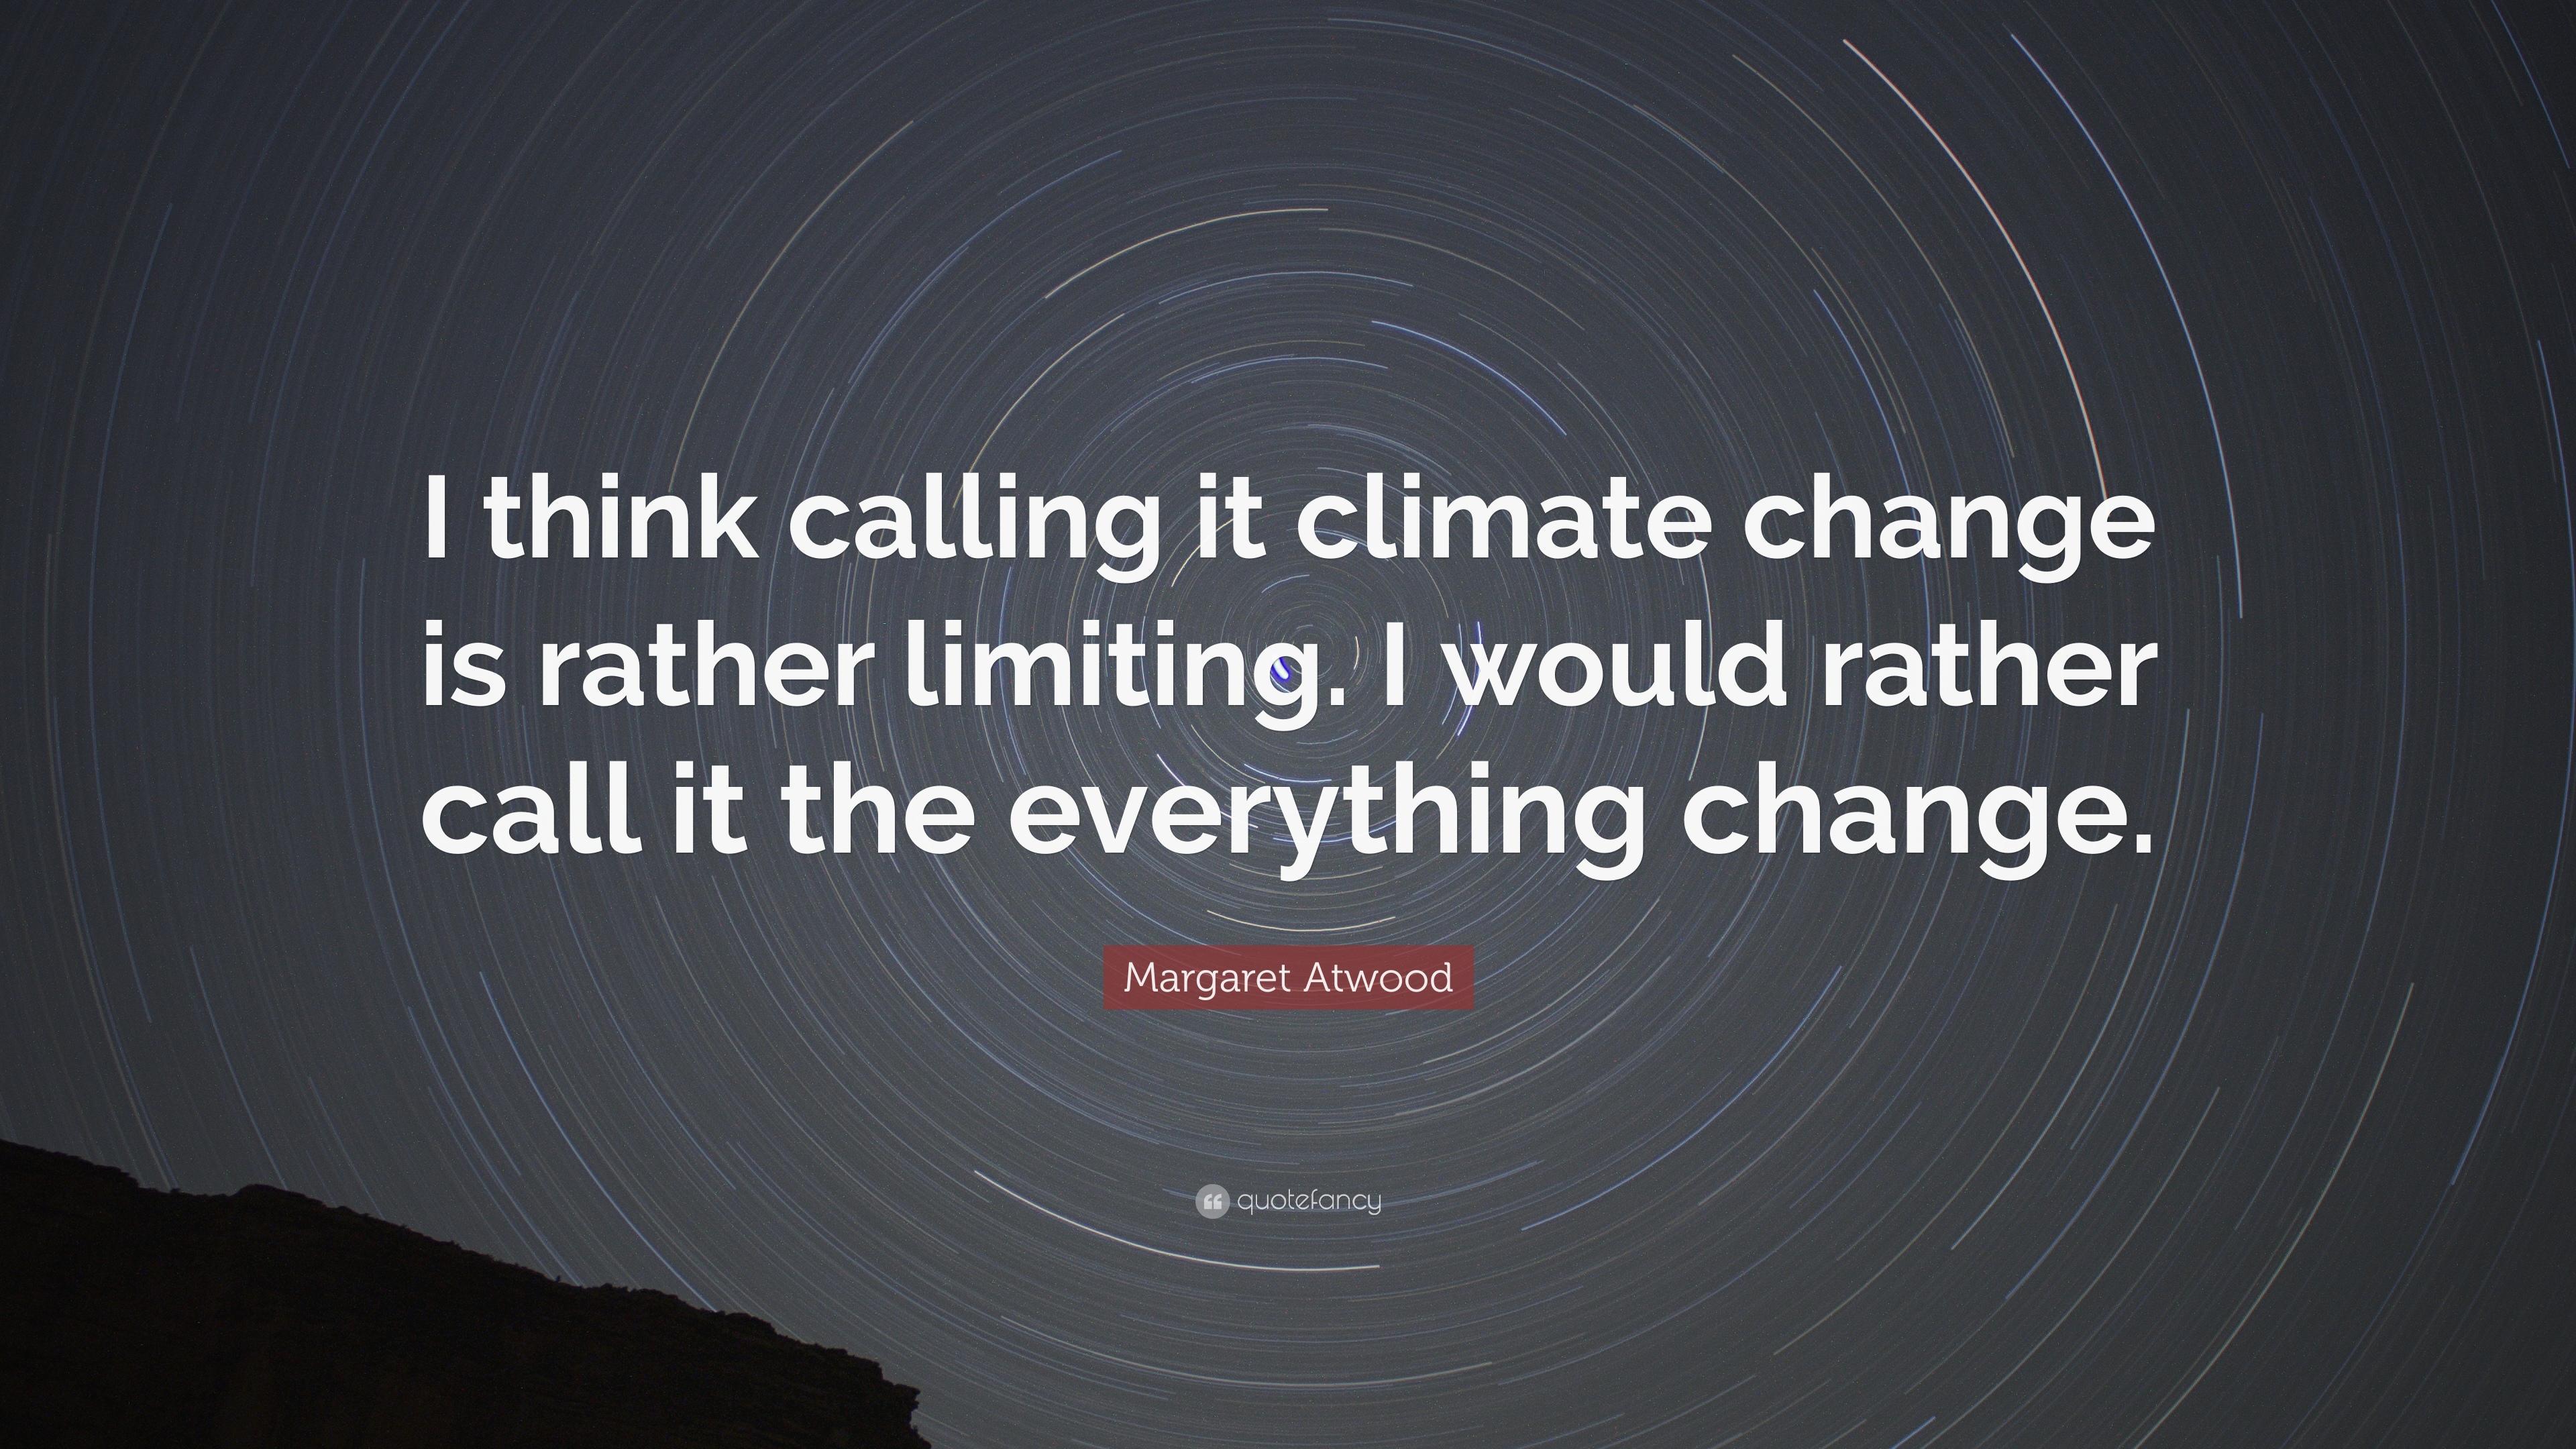 Margaret Atwood Quote: “I think calling it climate change is rather